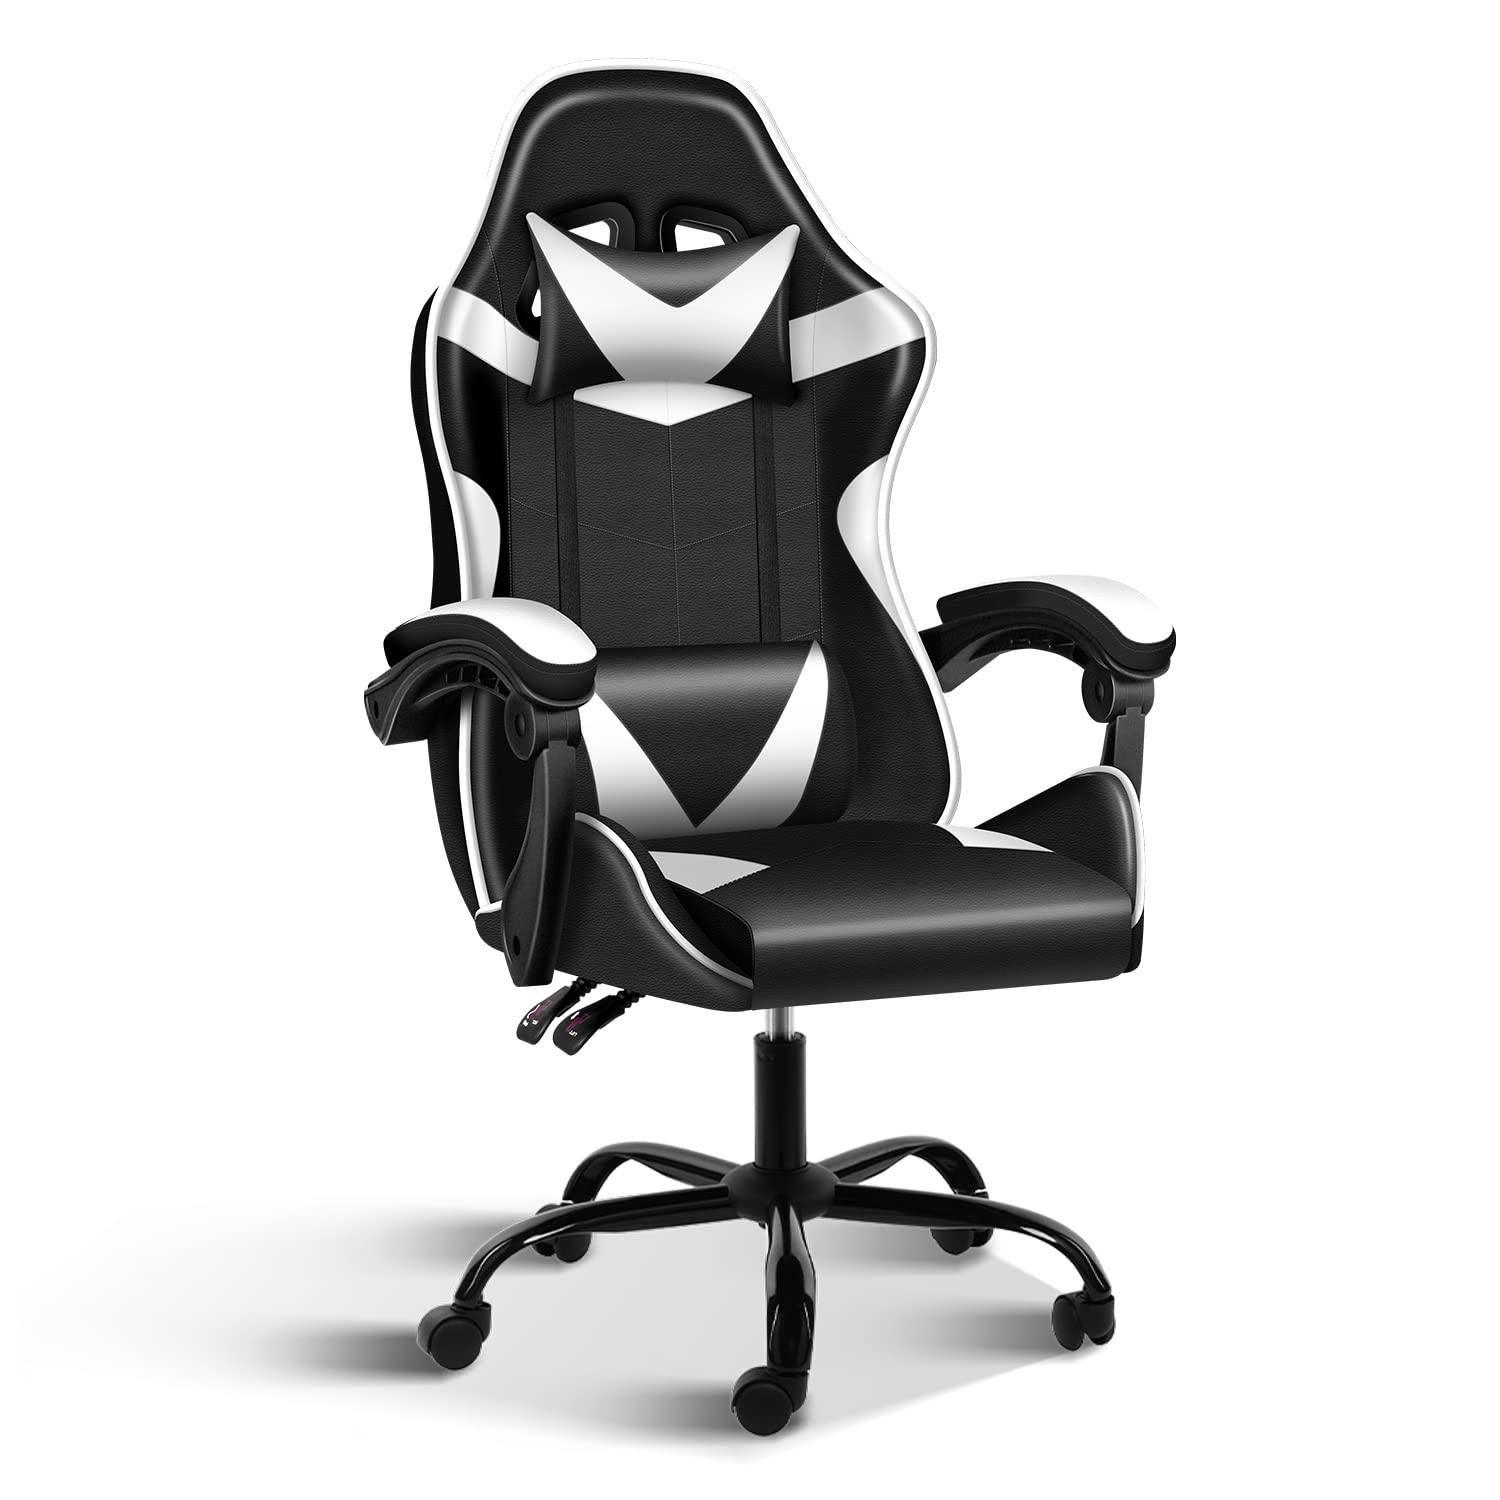 HealSmart Chair Racing Video Backrest and Seat Height Recliner Gaming, Without footrest, Black/White